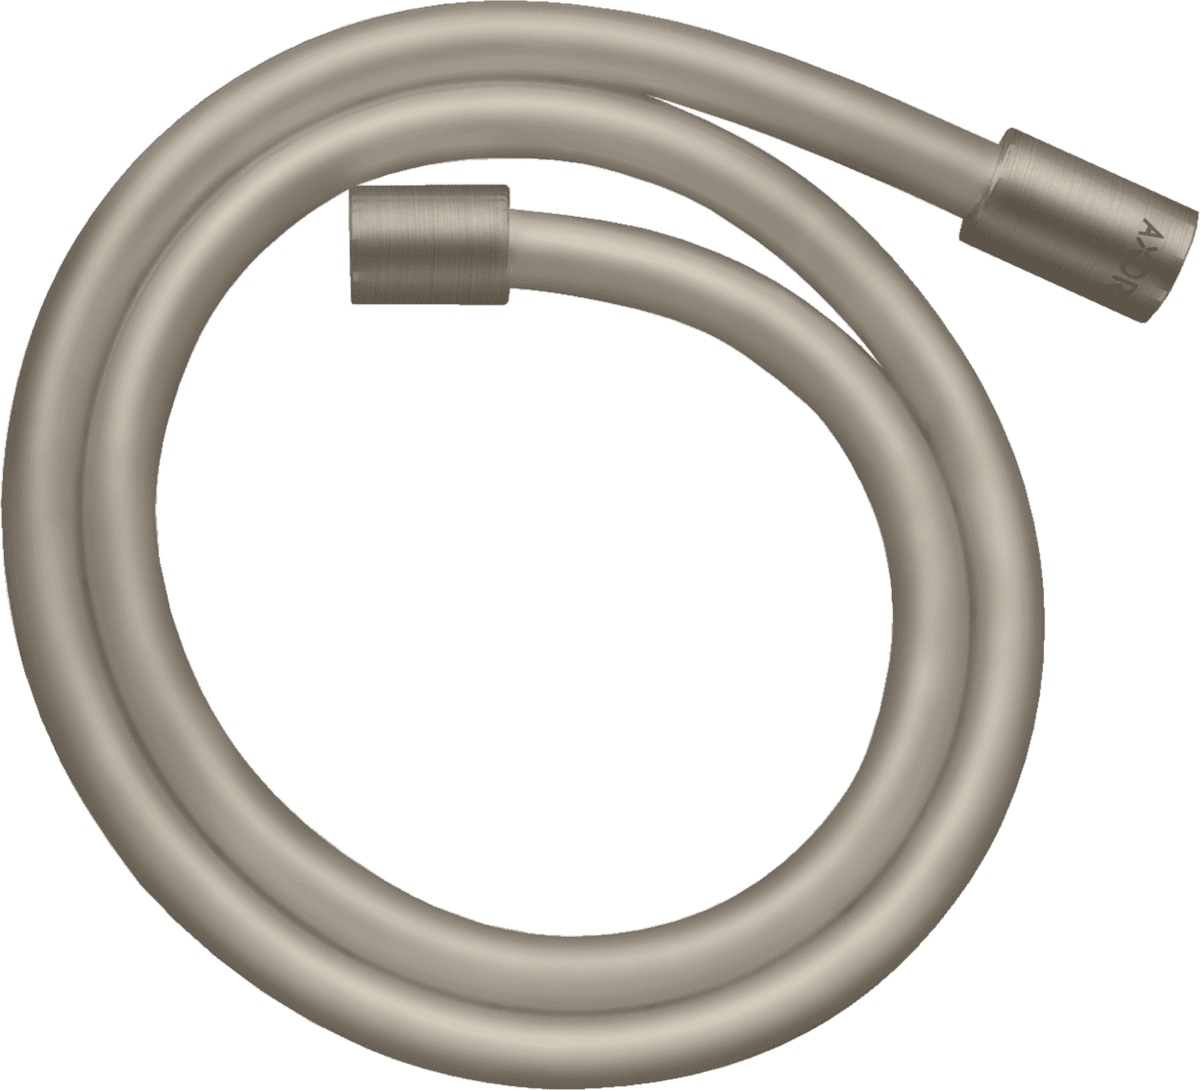 Picture of HANSGROHE AXOR Starck Metal effect shower hose 2.00 m with cylindrical nuts #28284820 - Brushed Nickel